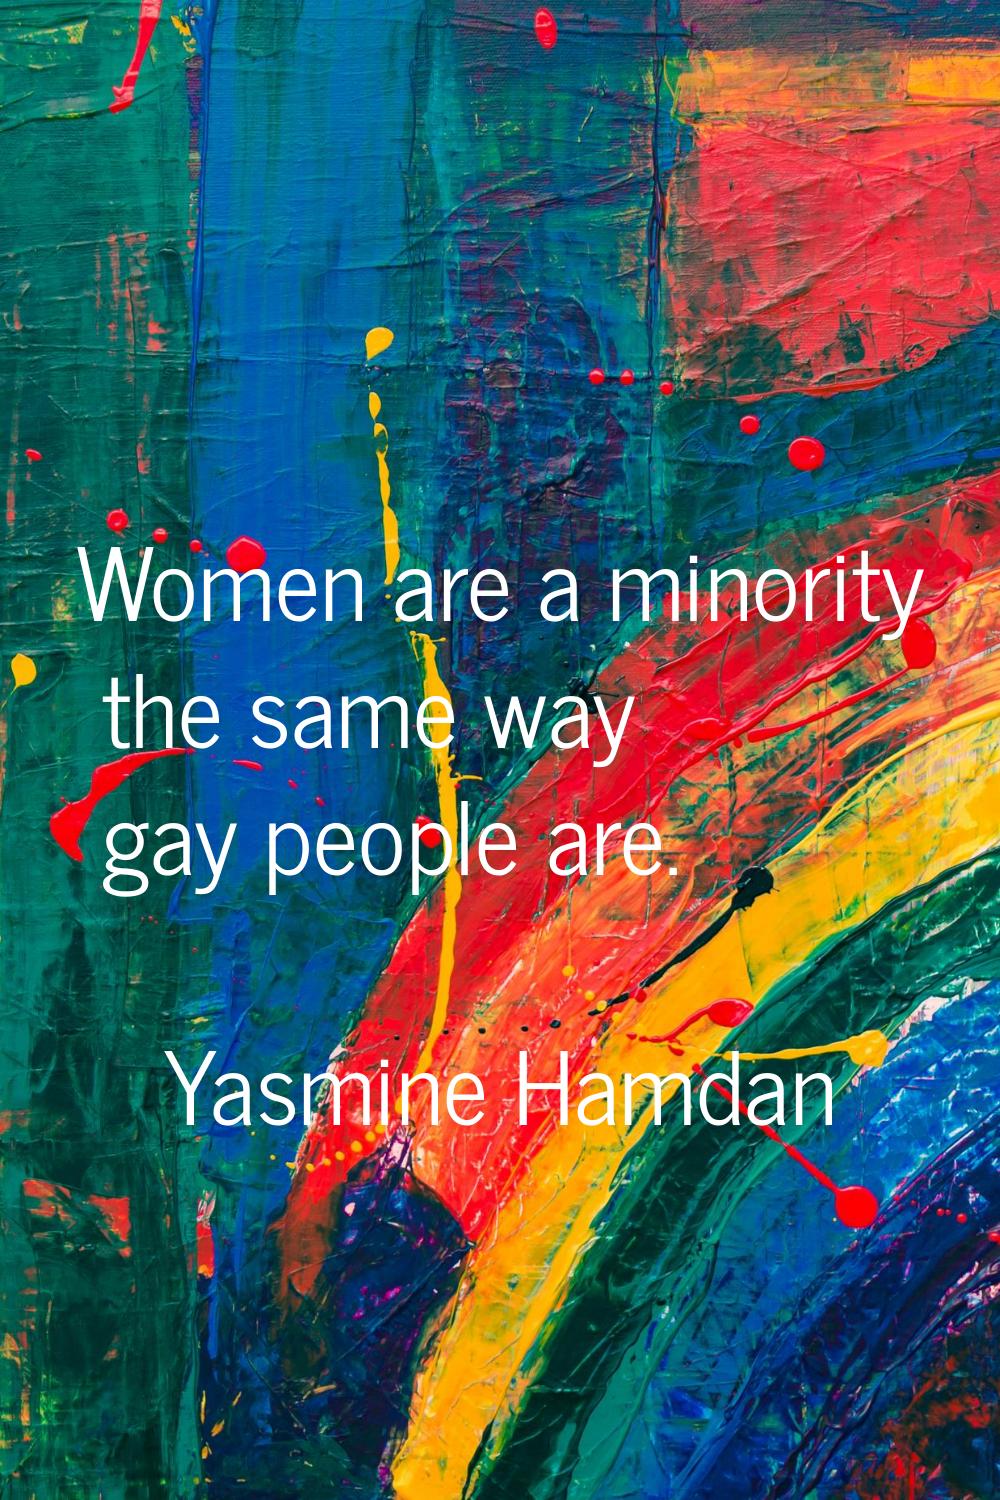 Women are a minority the same way gay people are.